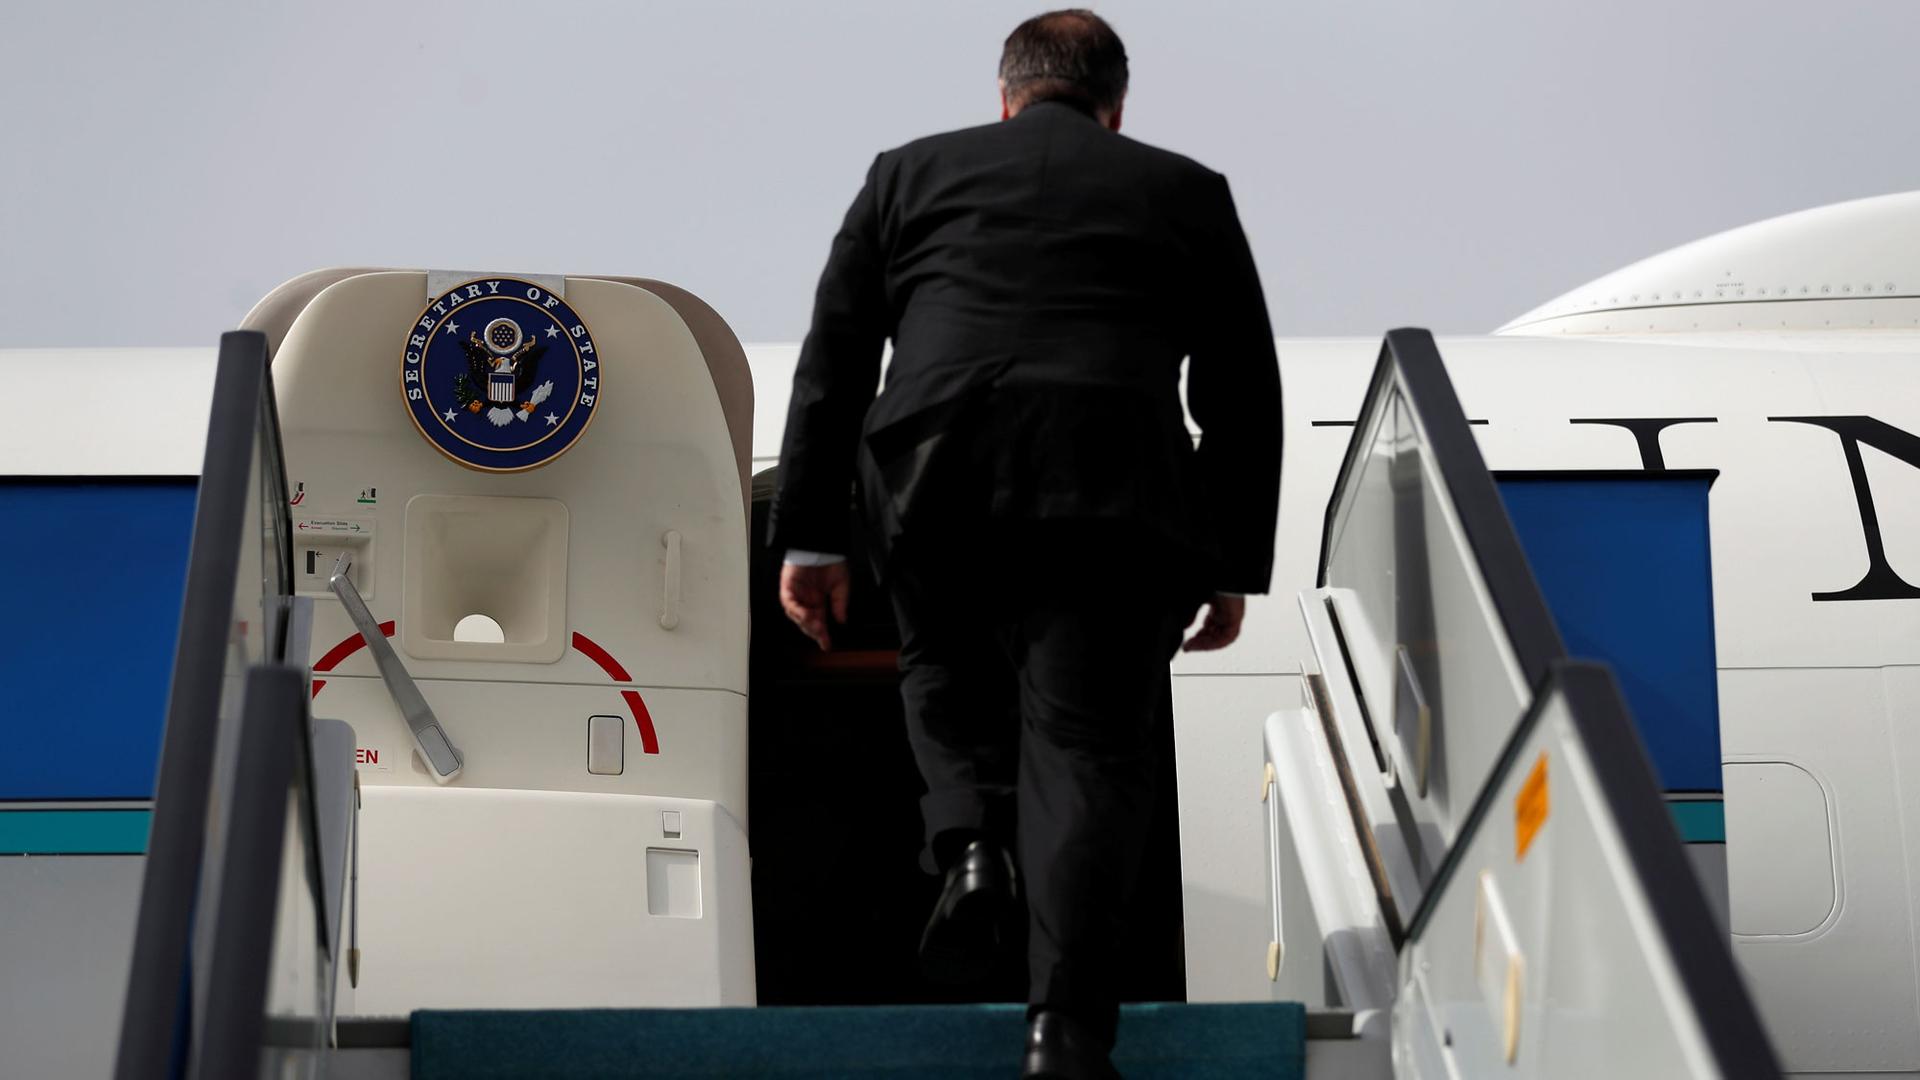 US Secretary of State Mike Pompeo is seen walking up the staircase leading to his plane emblazoned with the Secretary of State logo.